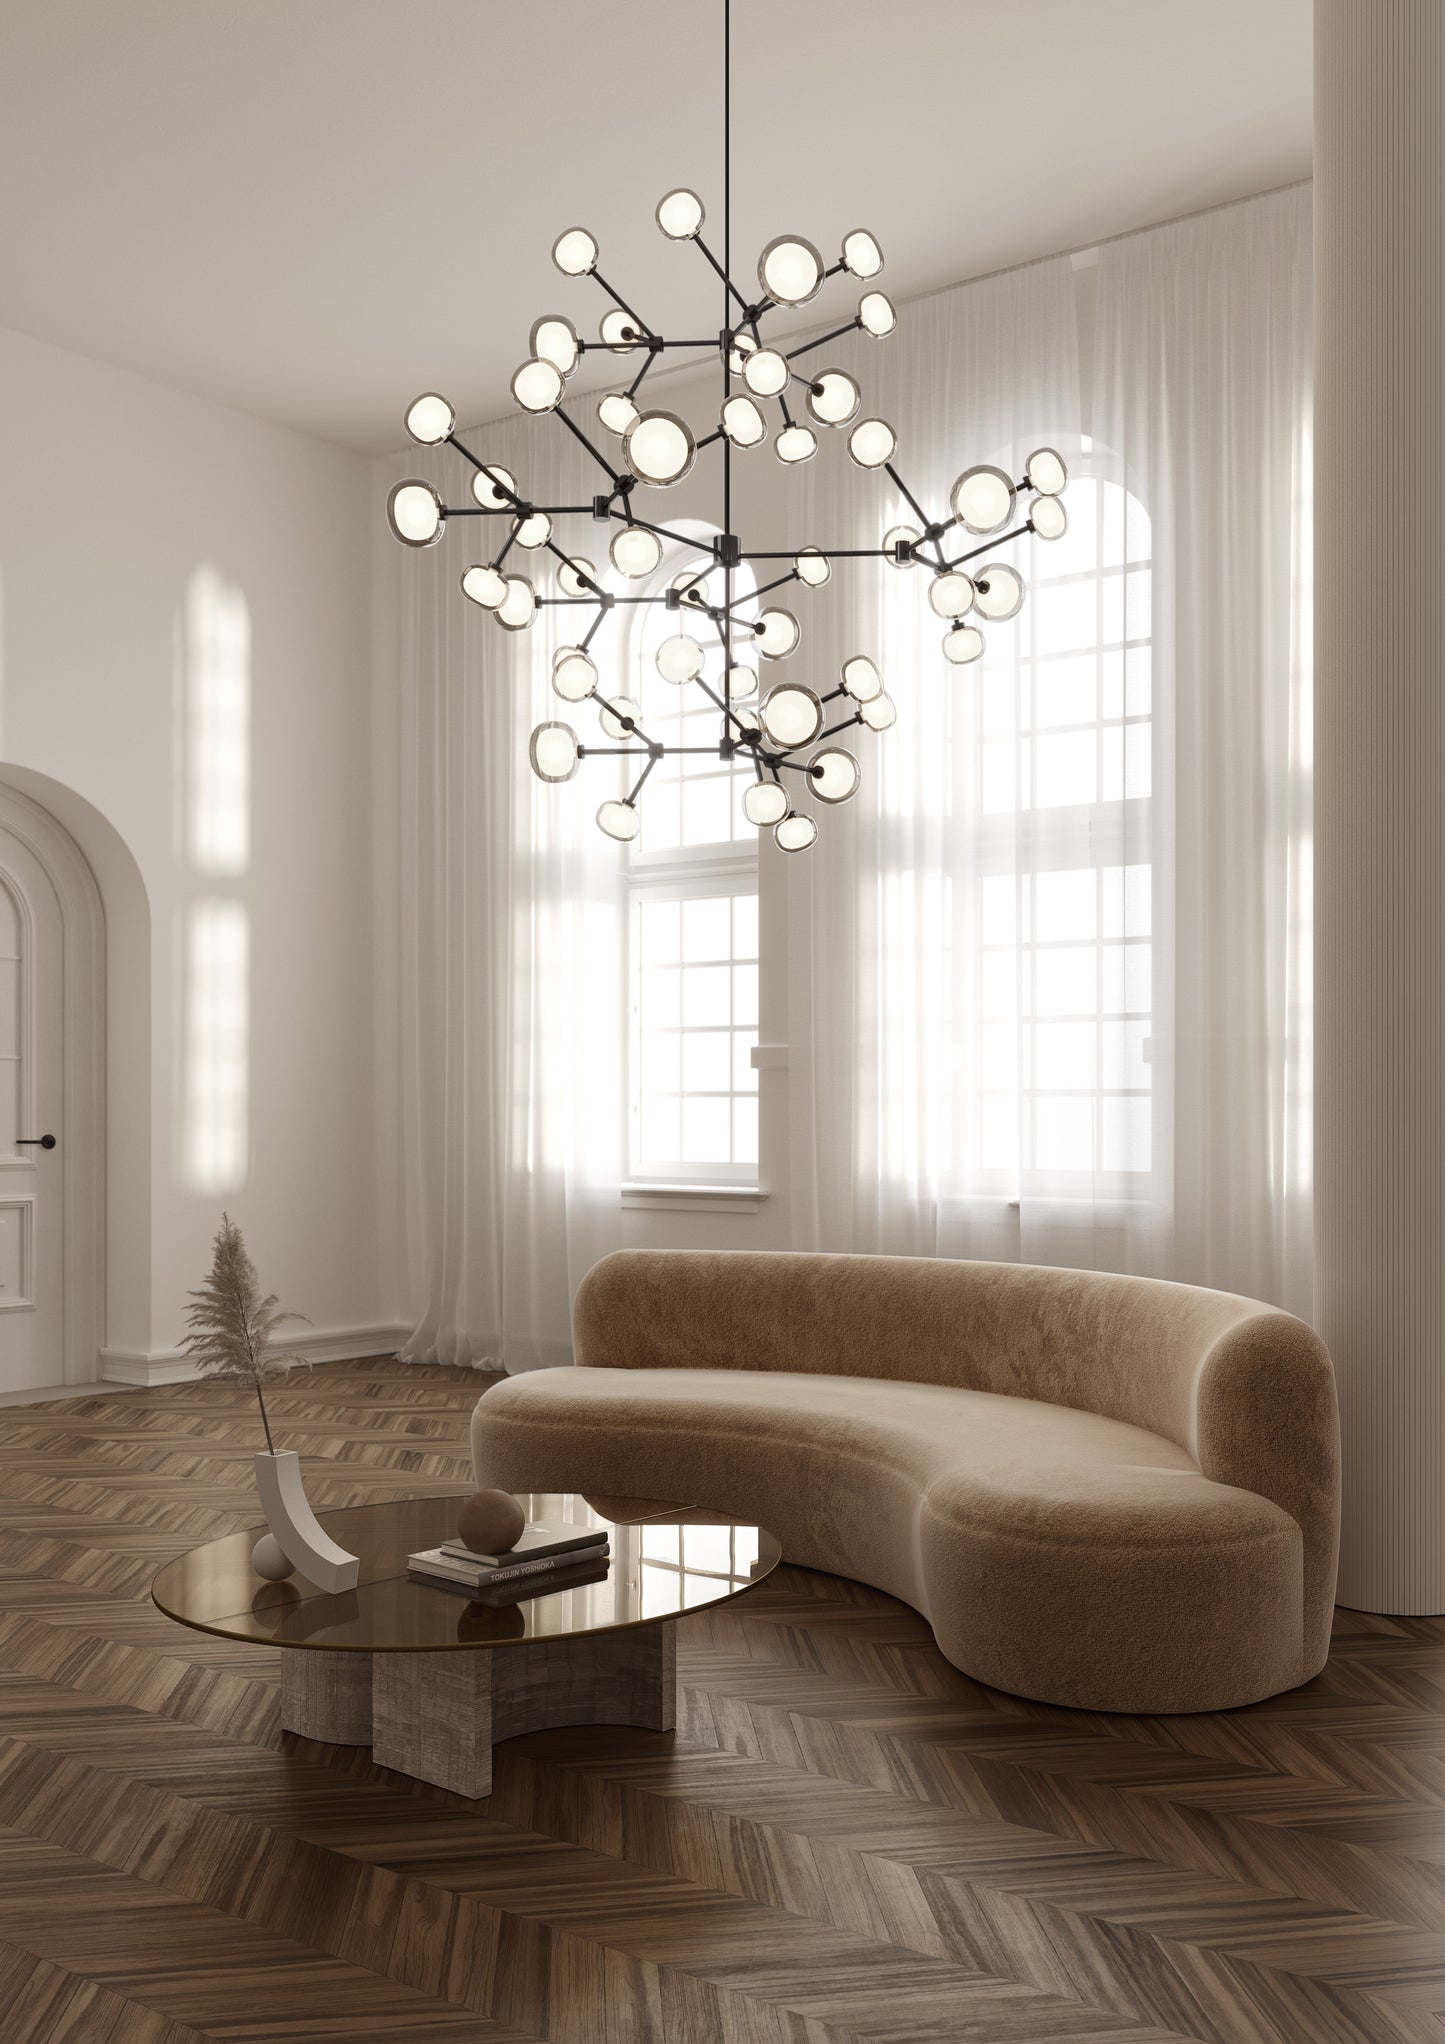 NABILA CHANDELIER BY TOOY from $25,000